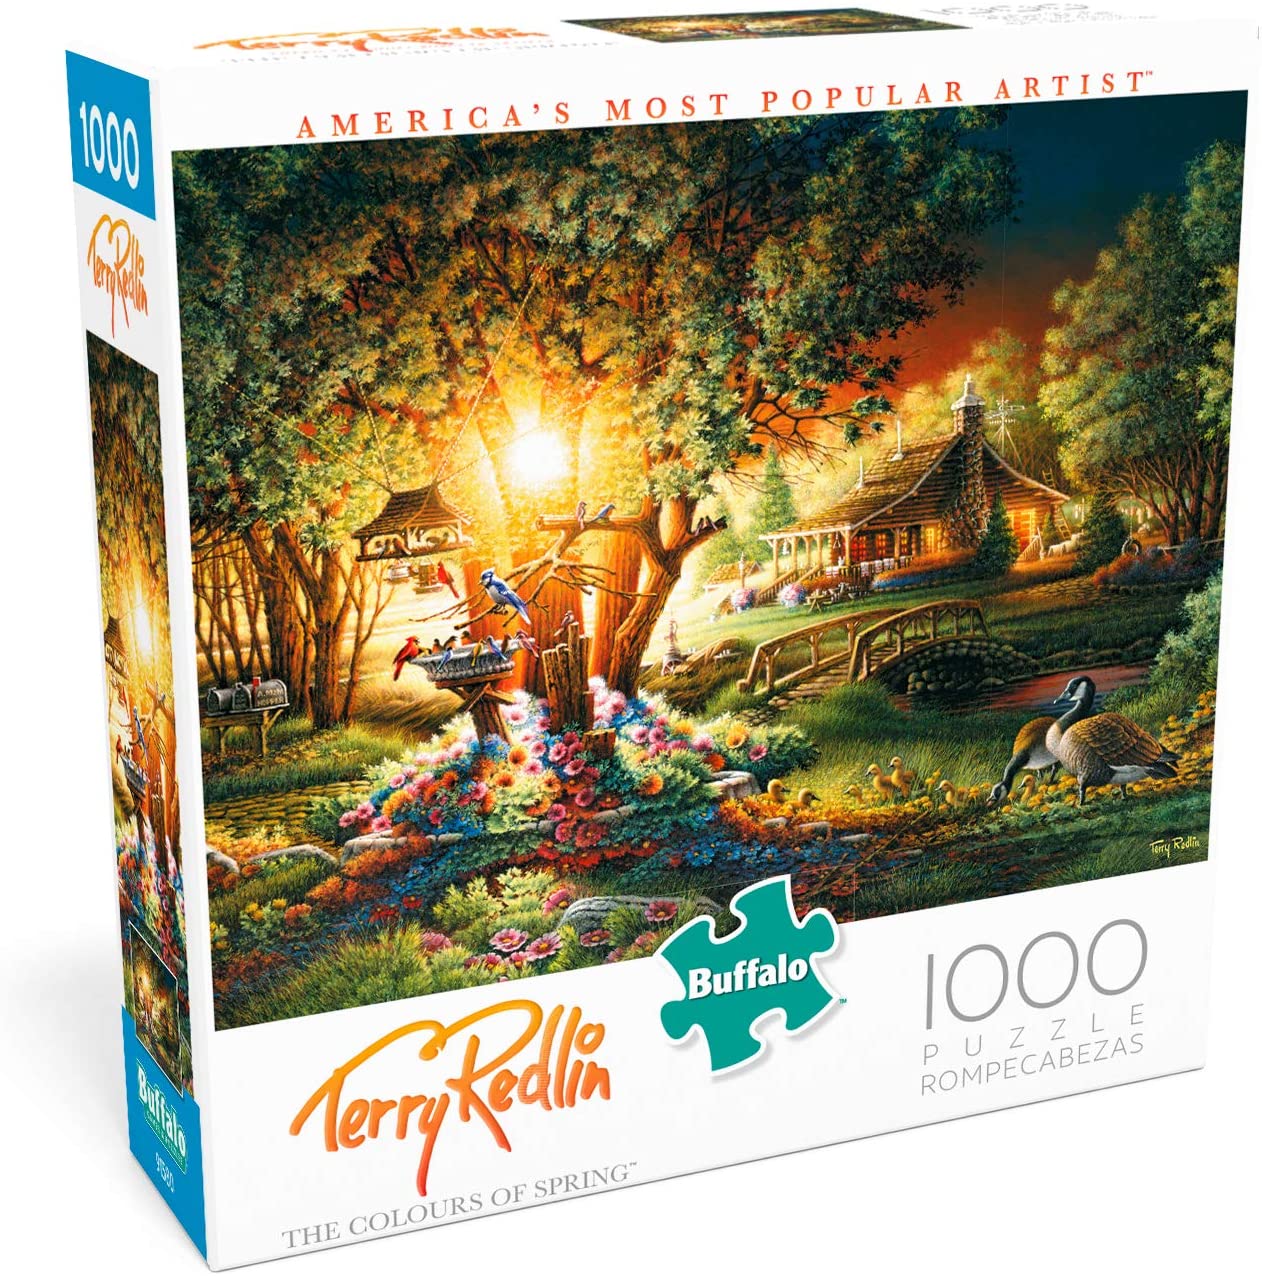 1000-Piece Buffalo Games Terry Redlin Colours of Spring Jigsaw Puzzle $4.90 + FS w/ Amazon Prime or FS on $25+